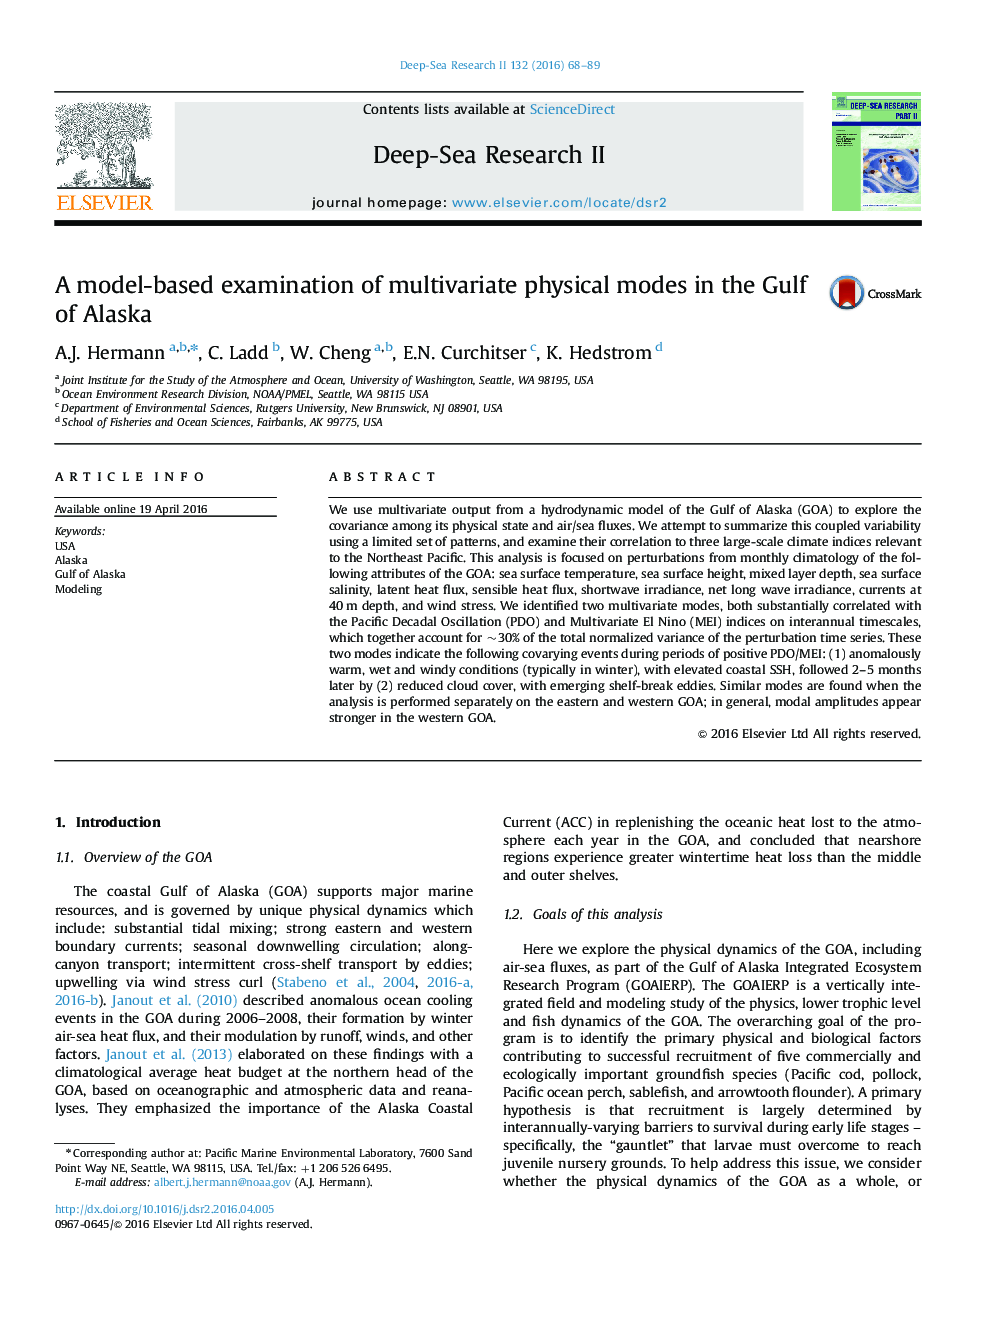 A model-based examination of multivariate physical modes in the Gulf of Alaska